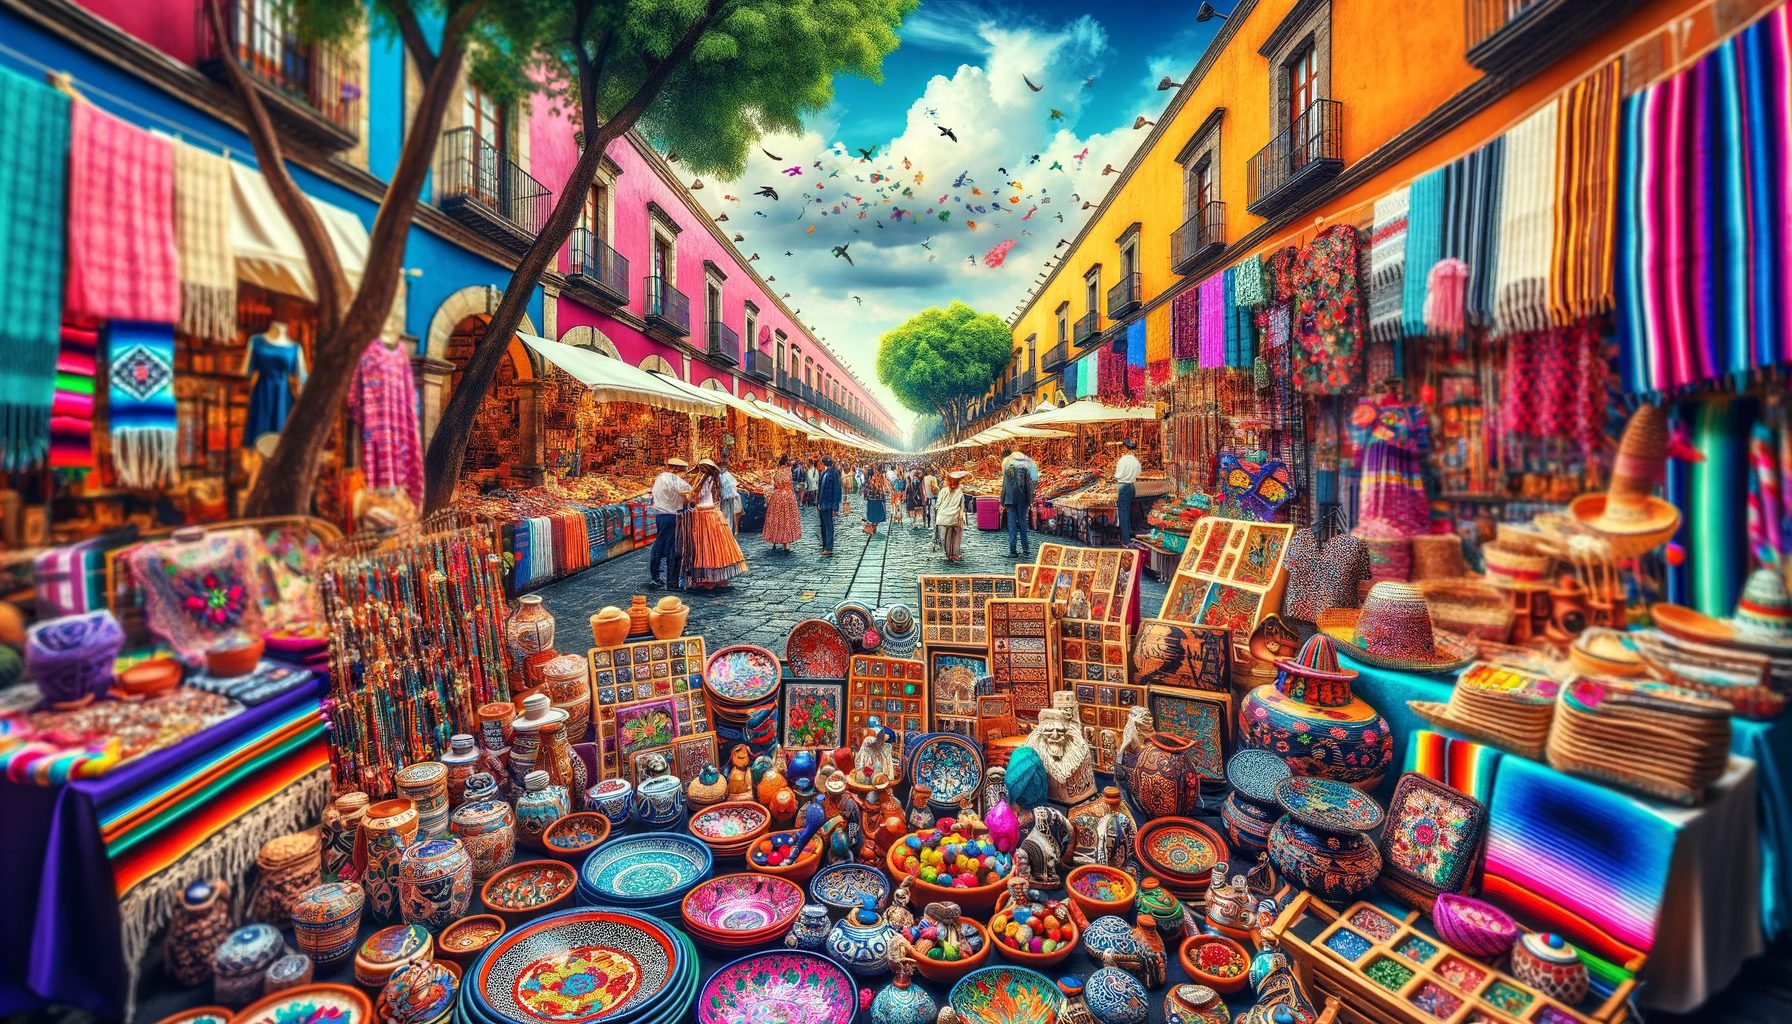 Colorful Mexican market street with handicrafts and textiles.